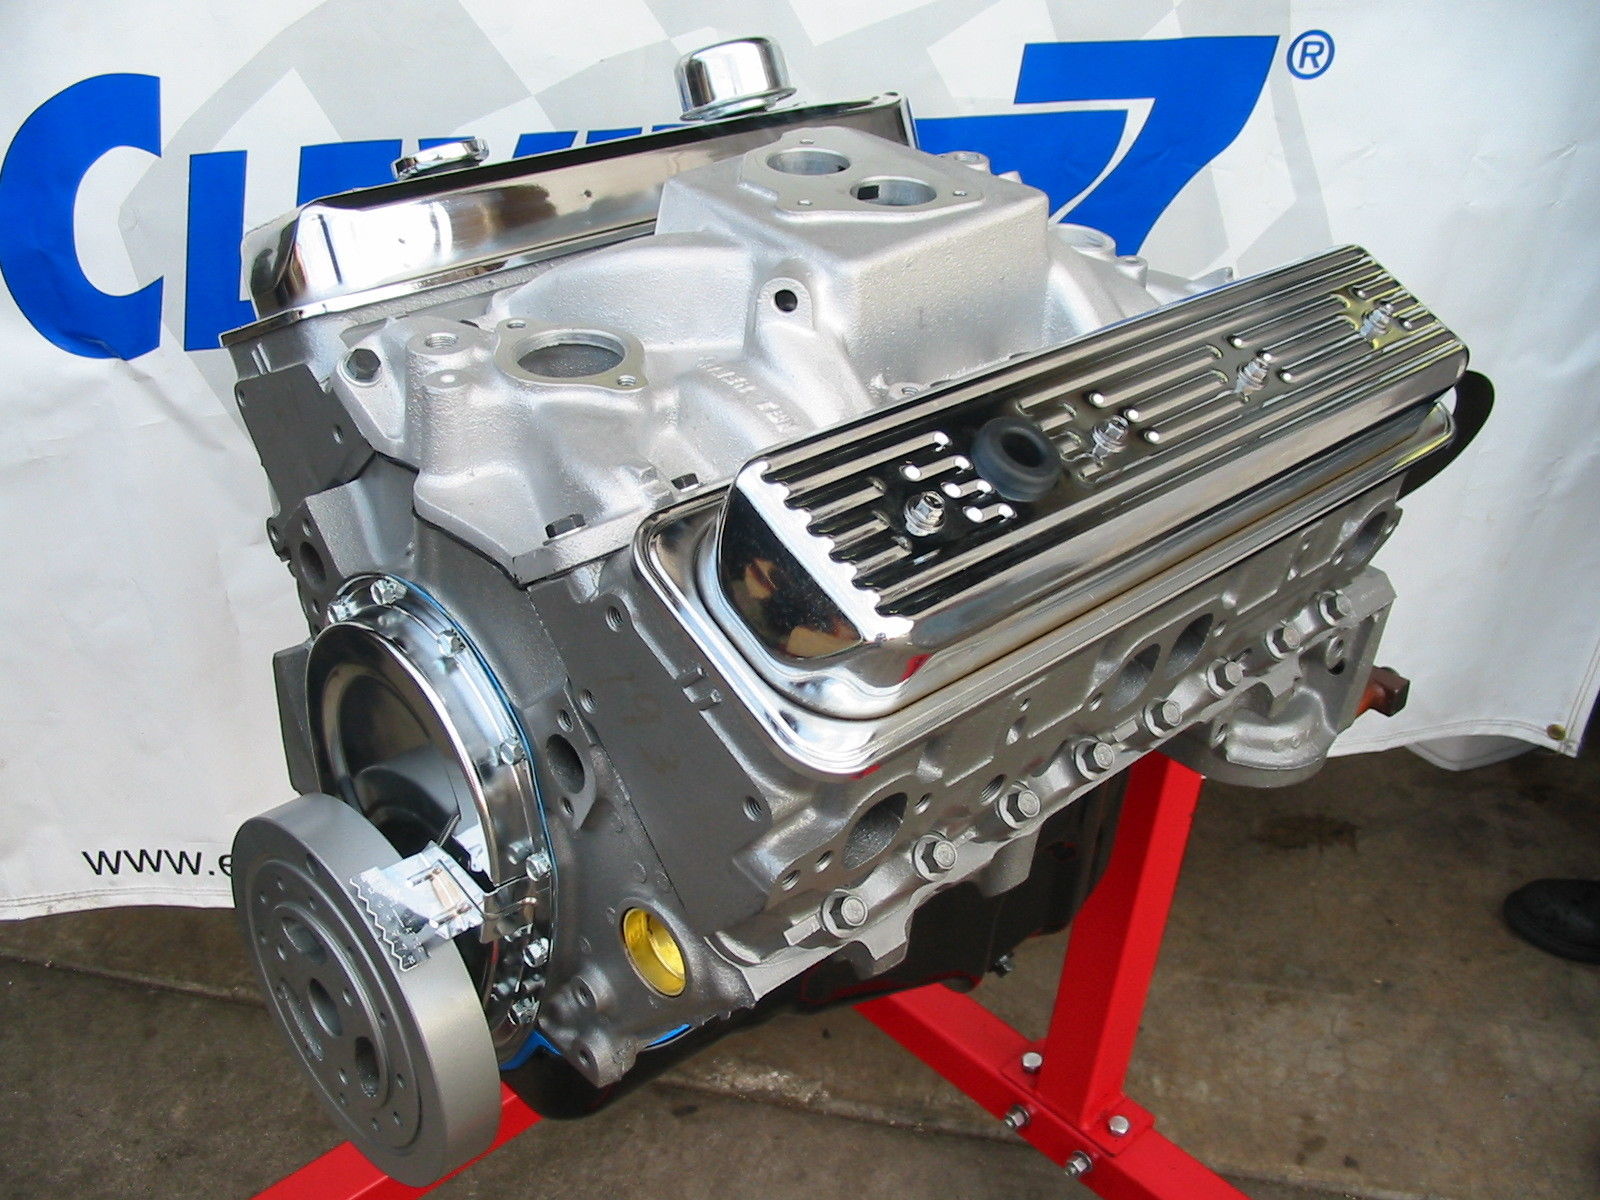 Chevy 350 / 310 HP High Performance TBI Balanced Crate Engine - Five Star Engines